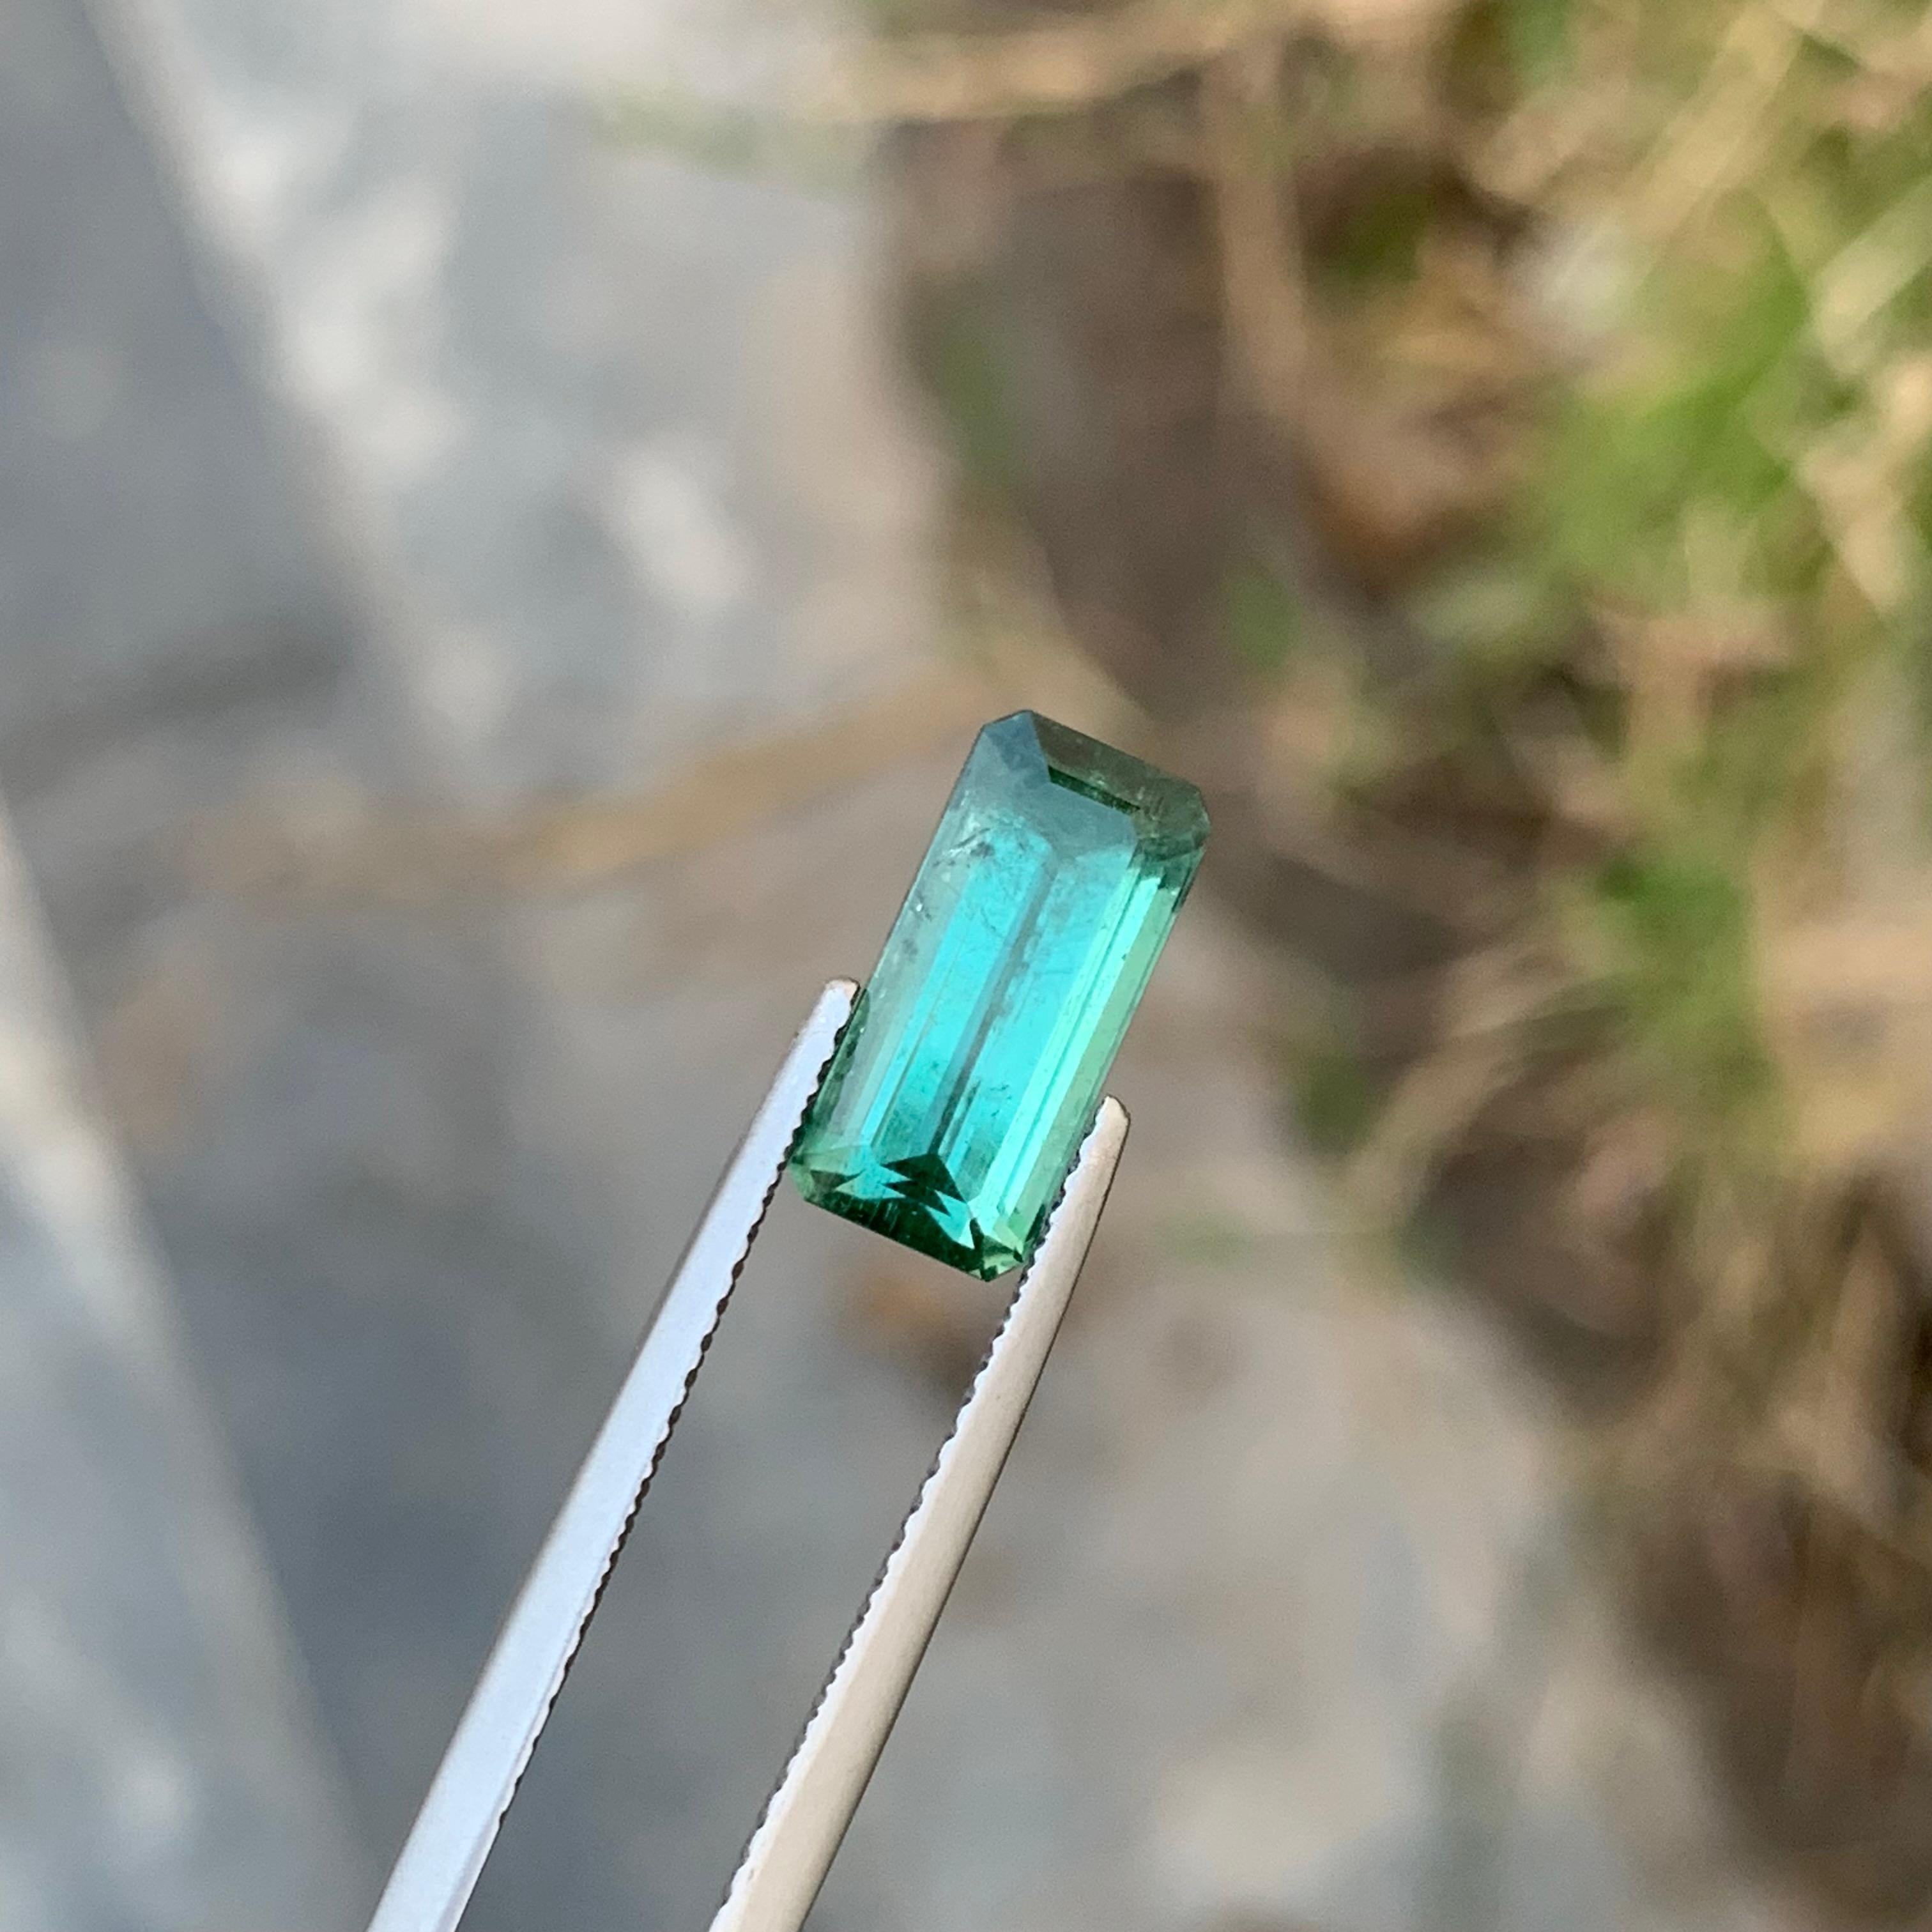 Loose Lagoon Tourmaline

Weight: 3.05 Carats
Dimension: 11.9 x 5.7 x 5 Mm
Colour: Lagoon 
Origin: Afghanistan
Certificate: On Demand
Treatment: Non

Tourmaline is a captivating gemstone known for its remarkable variety of colors, making it a